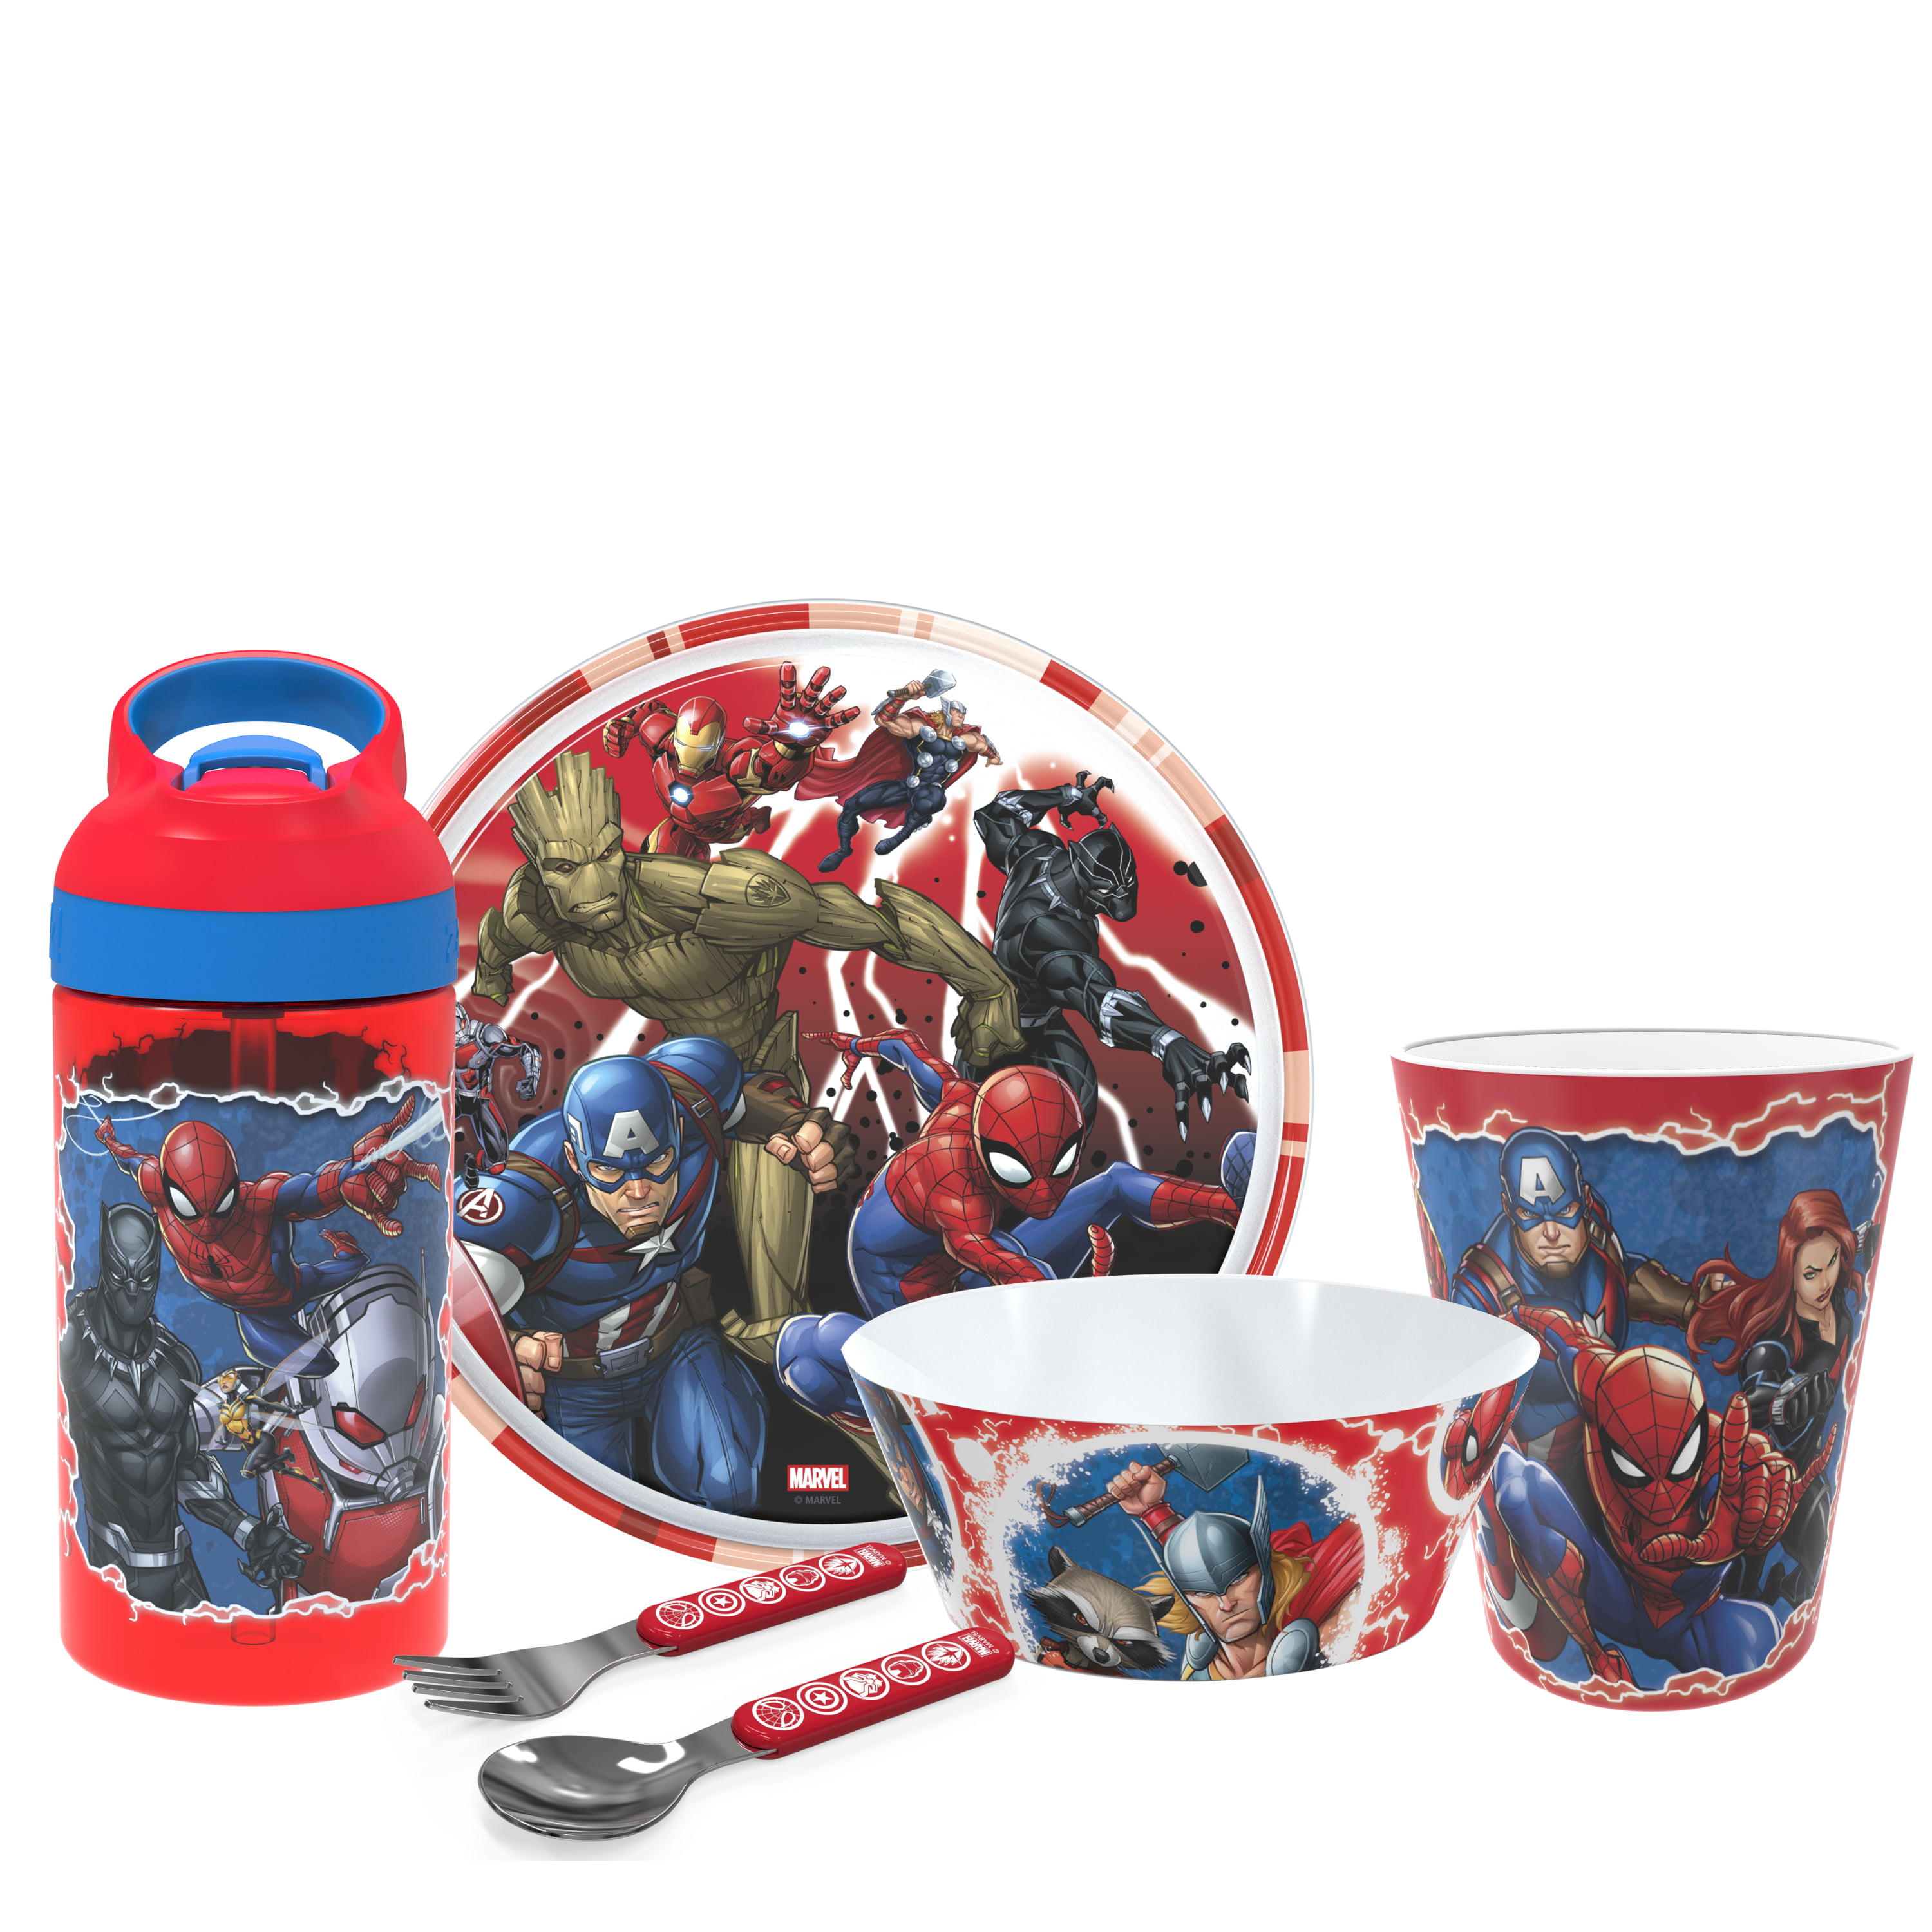 Spider Man Marvel Multicoloured Stoneware Cereal or Soup Bowl 